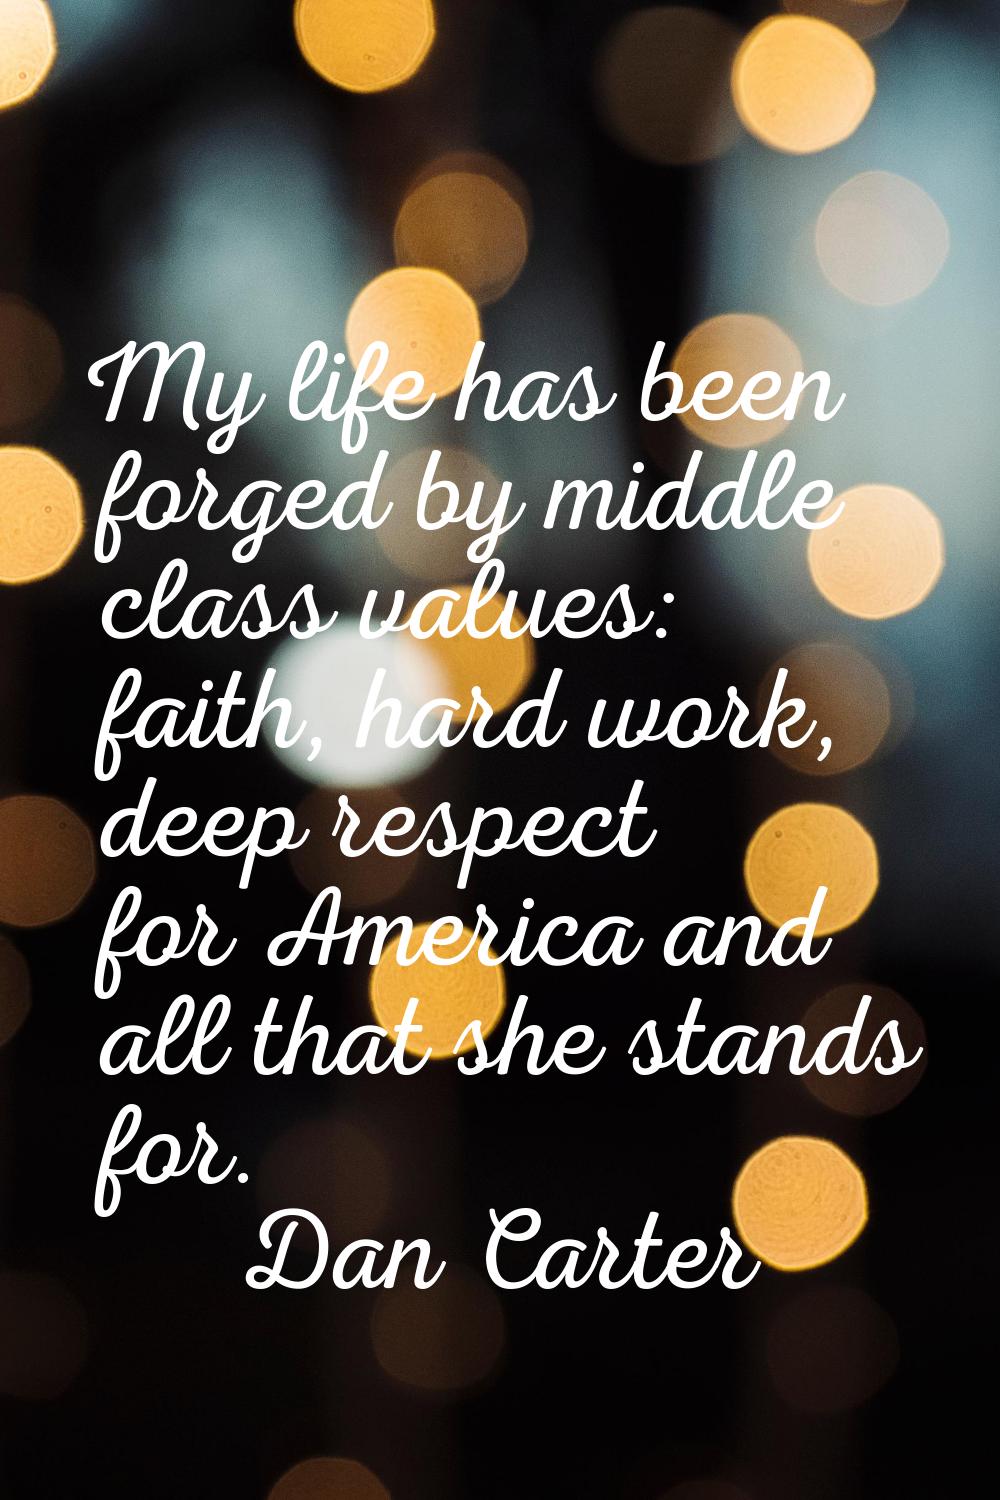 My life has been forged by middle class values: faith, hard work, deep respect for America and all 